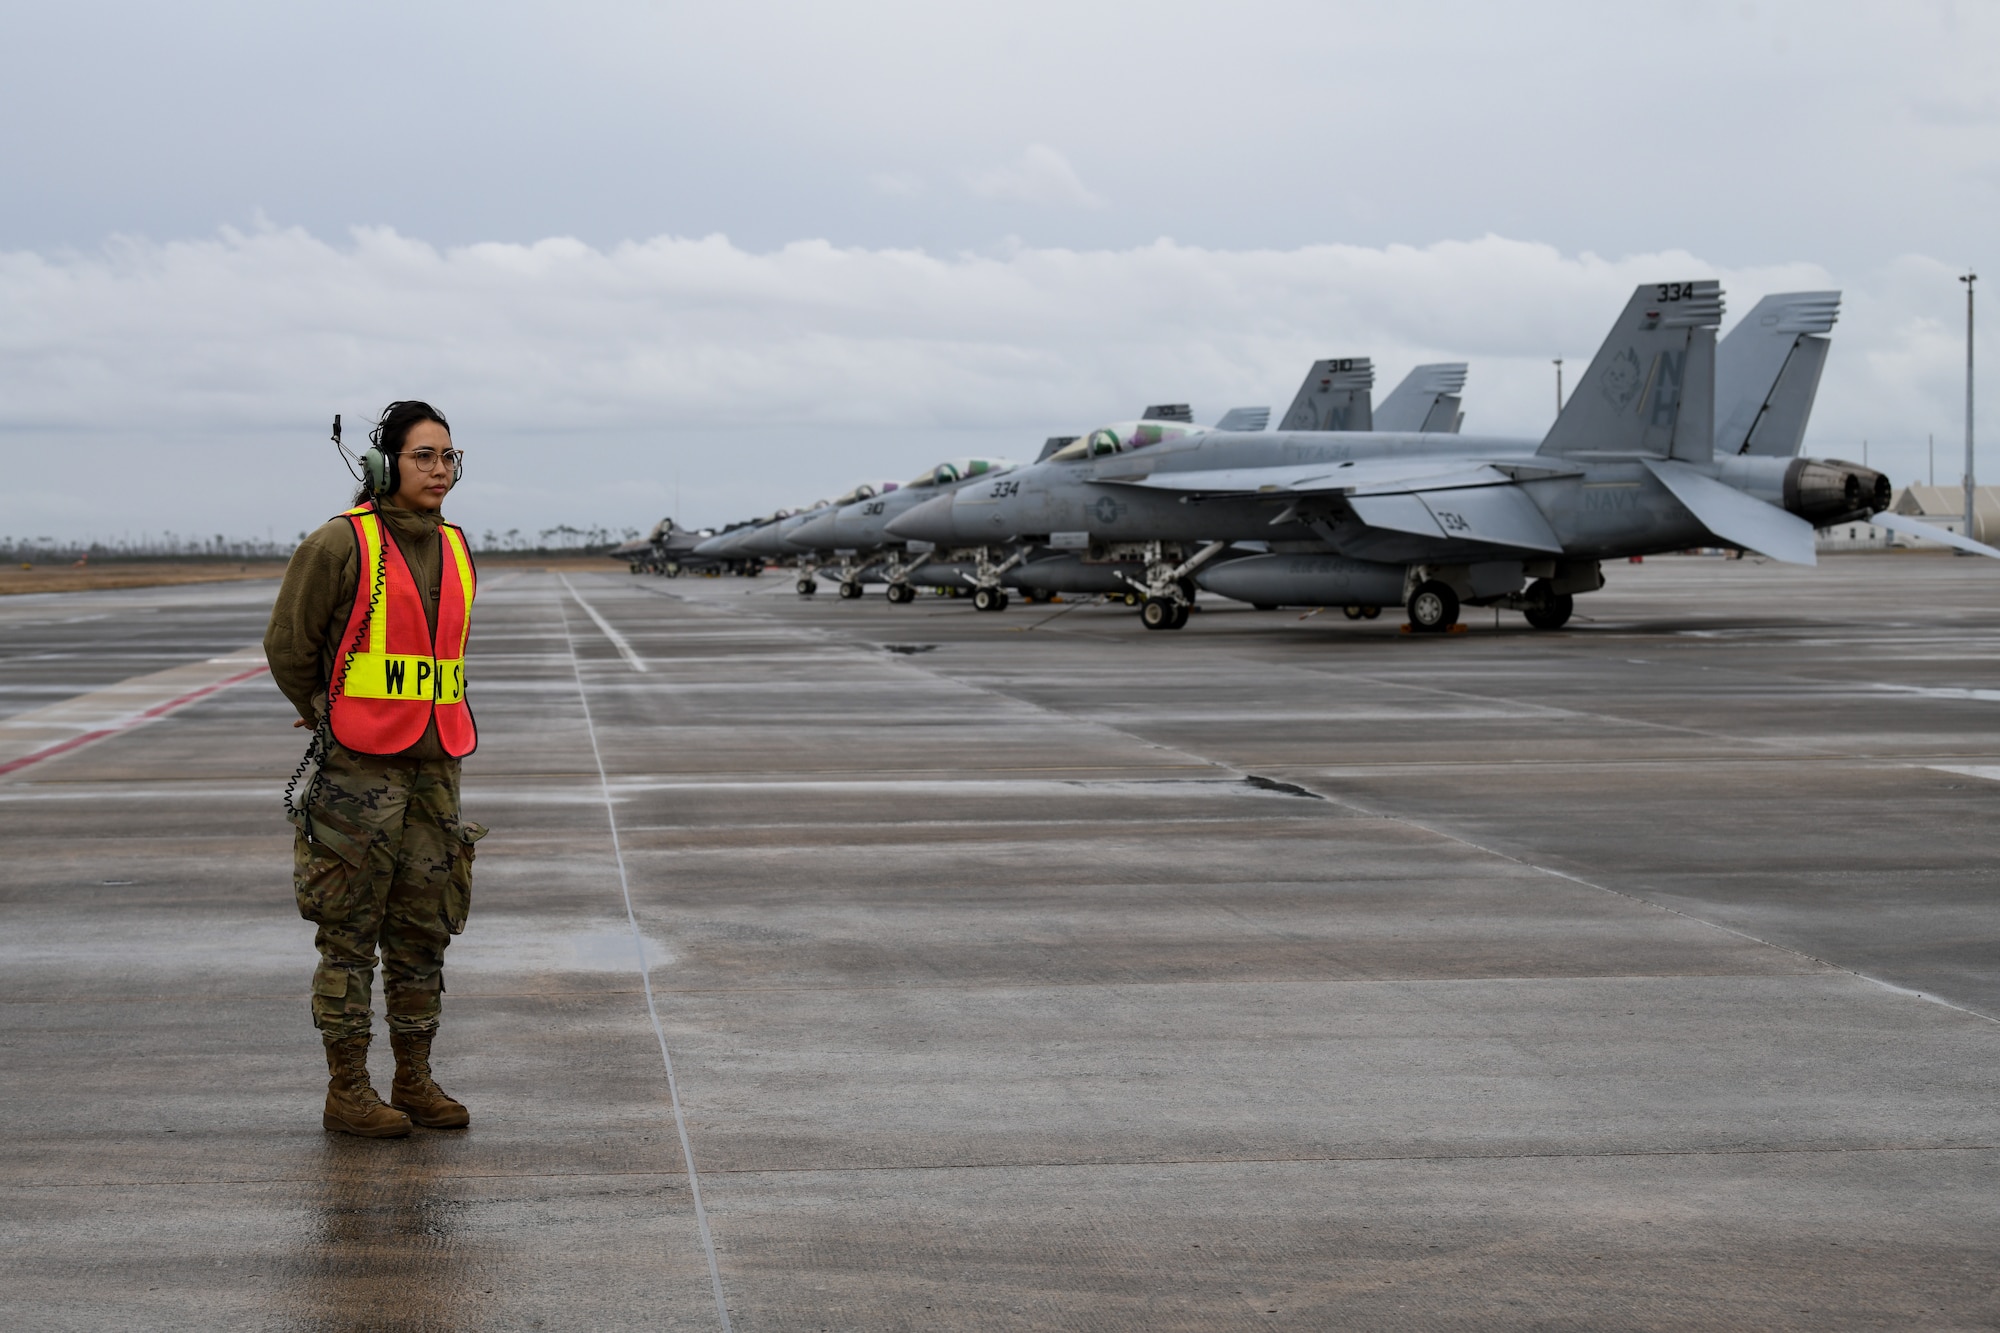 An image of U.S. Air Force Staff Sgt. Maria-Jose Ibarra, load crew chief with the 177th Fighter Wing of the New Jersey Air National Guard, preparing to marshal an F-16C+ Fighting Falcon at Tyndall Air Force Base, Fla.